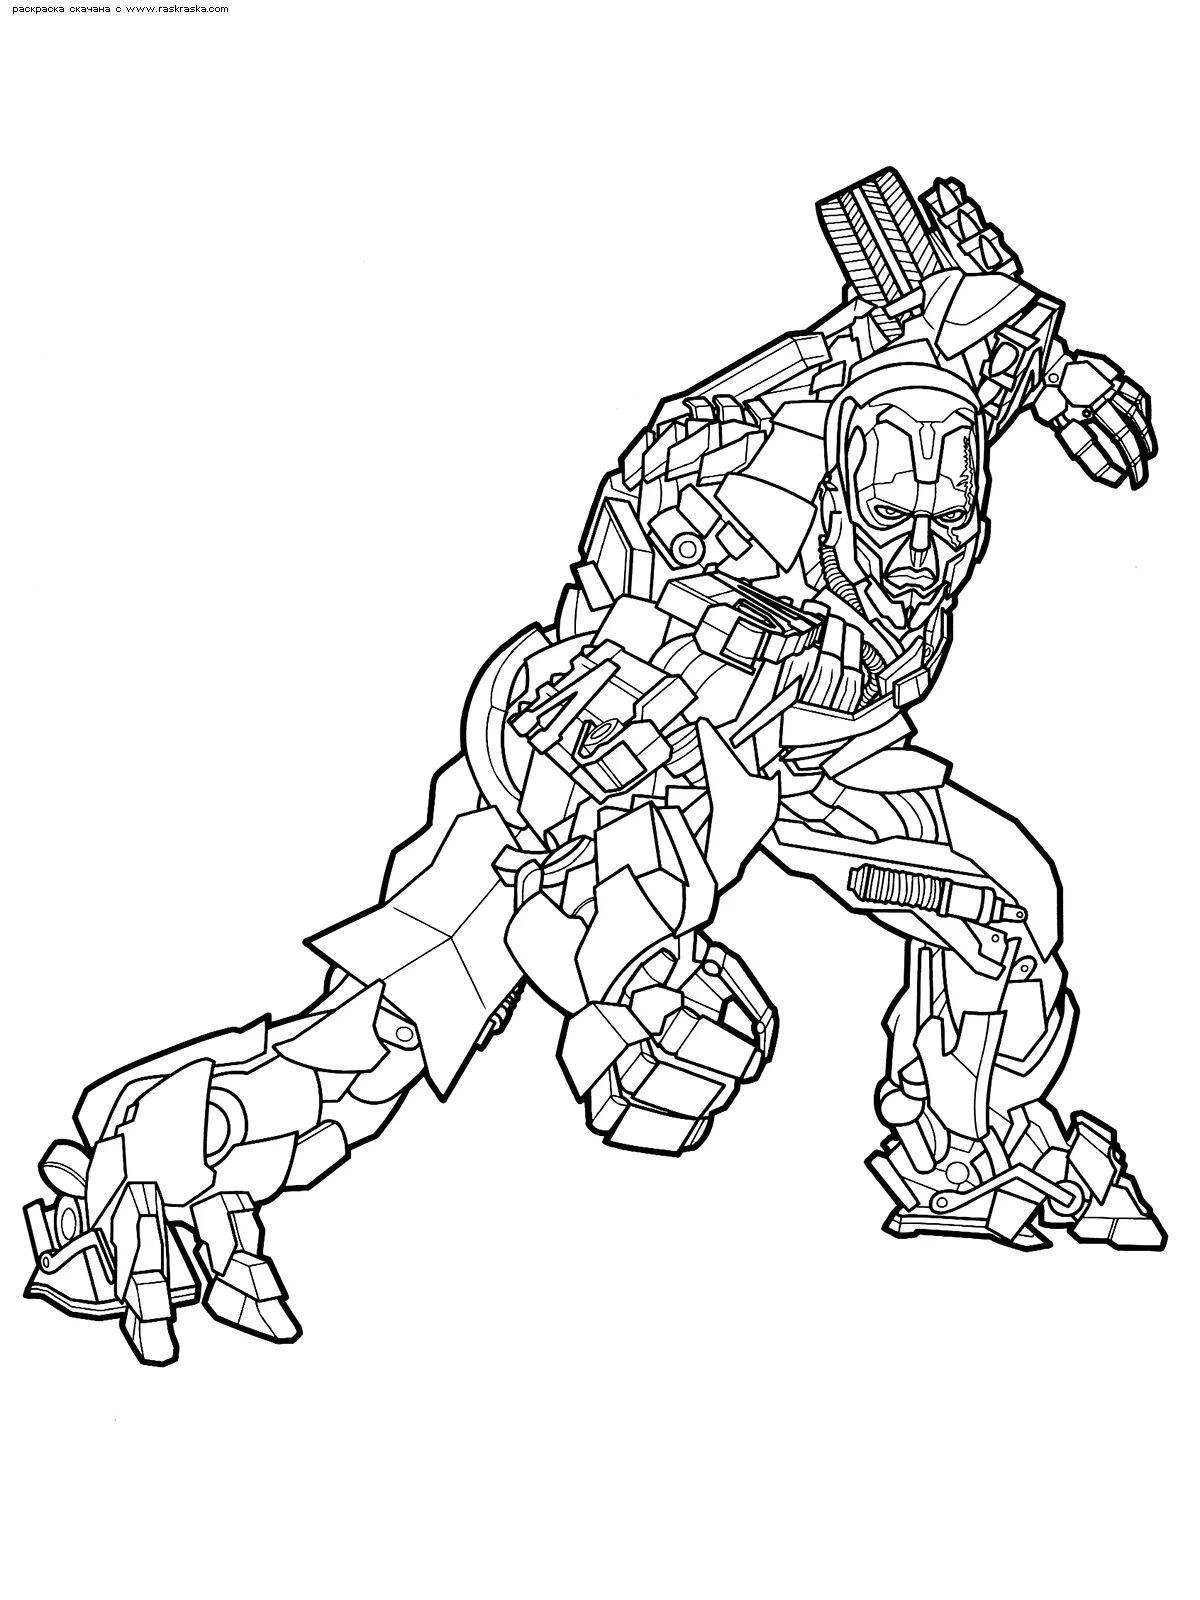 Fancy Transformers coloring page